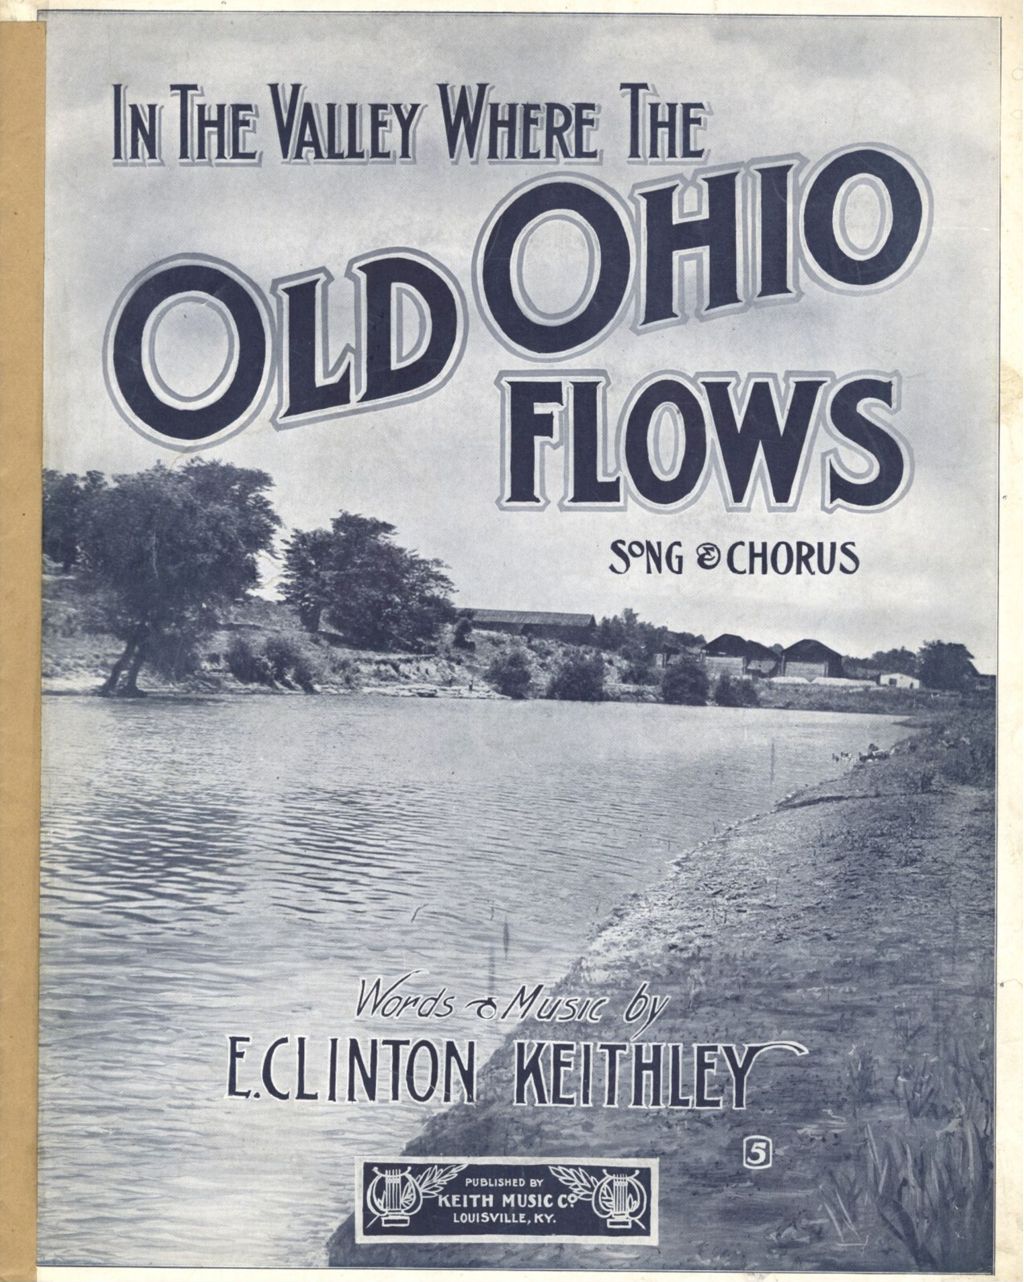 In the Valley Where the Old Ohio Flows